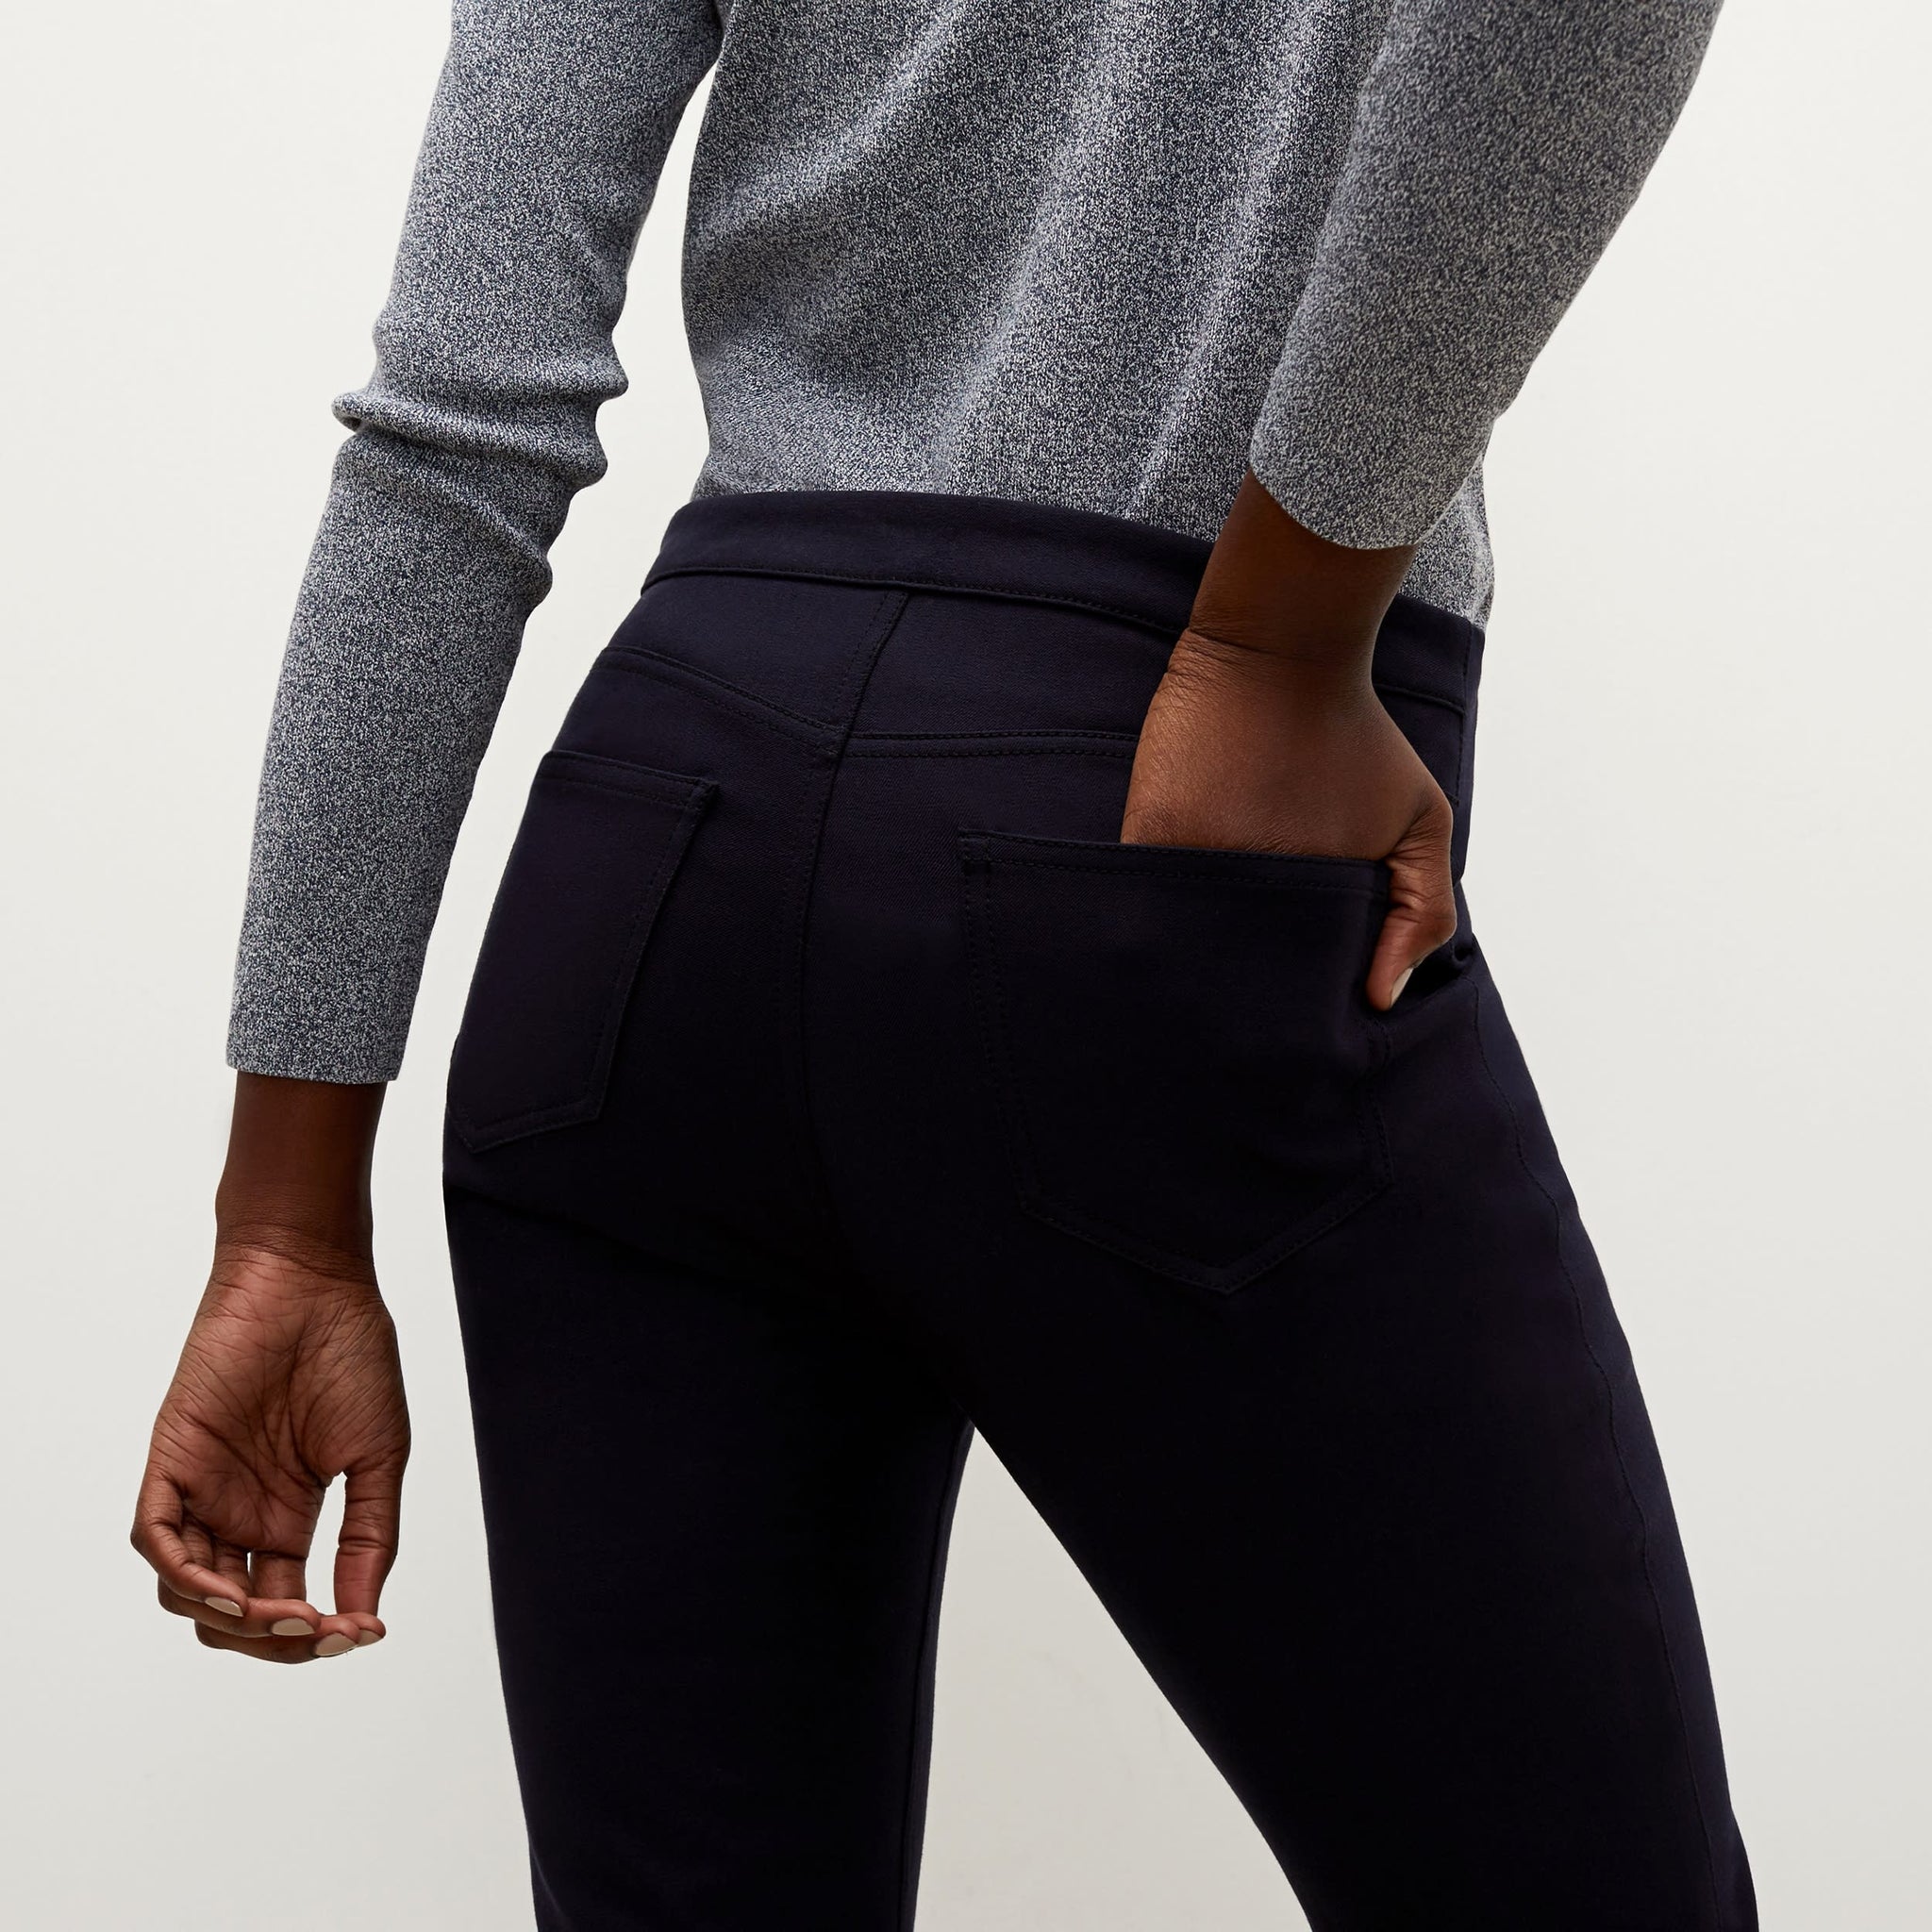 Detail image of a woman standing wearing the Hockley pant in ink